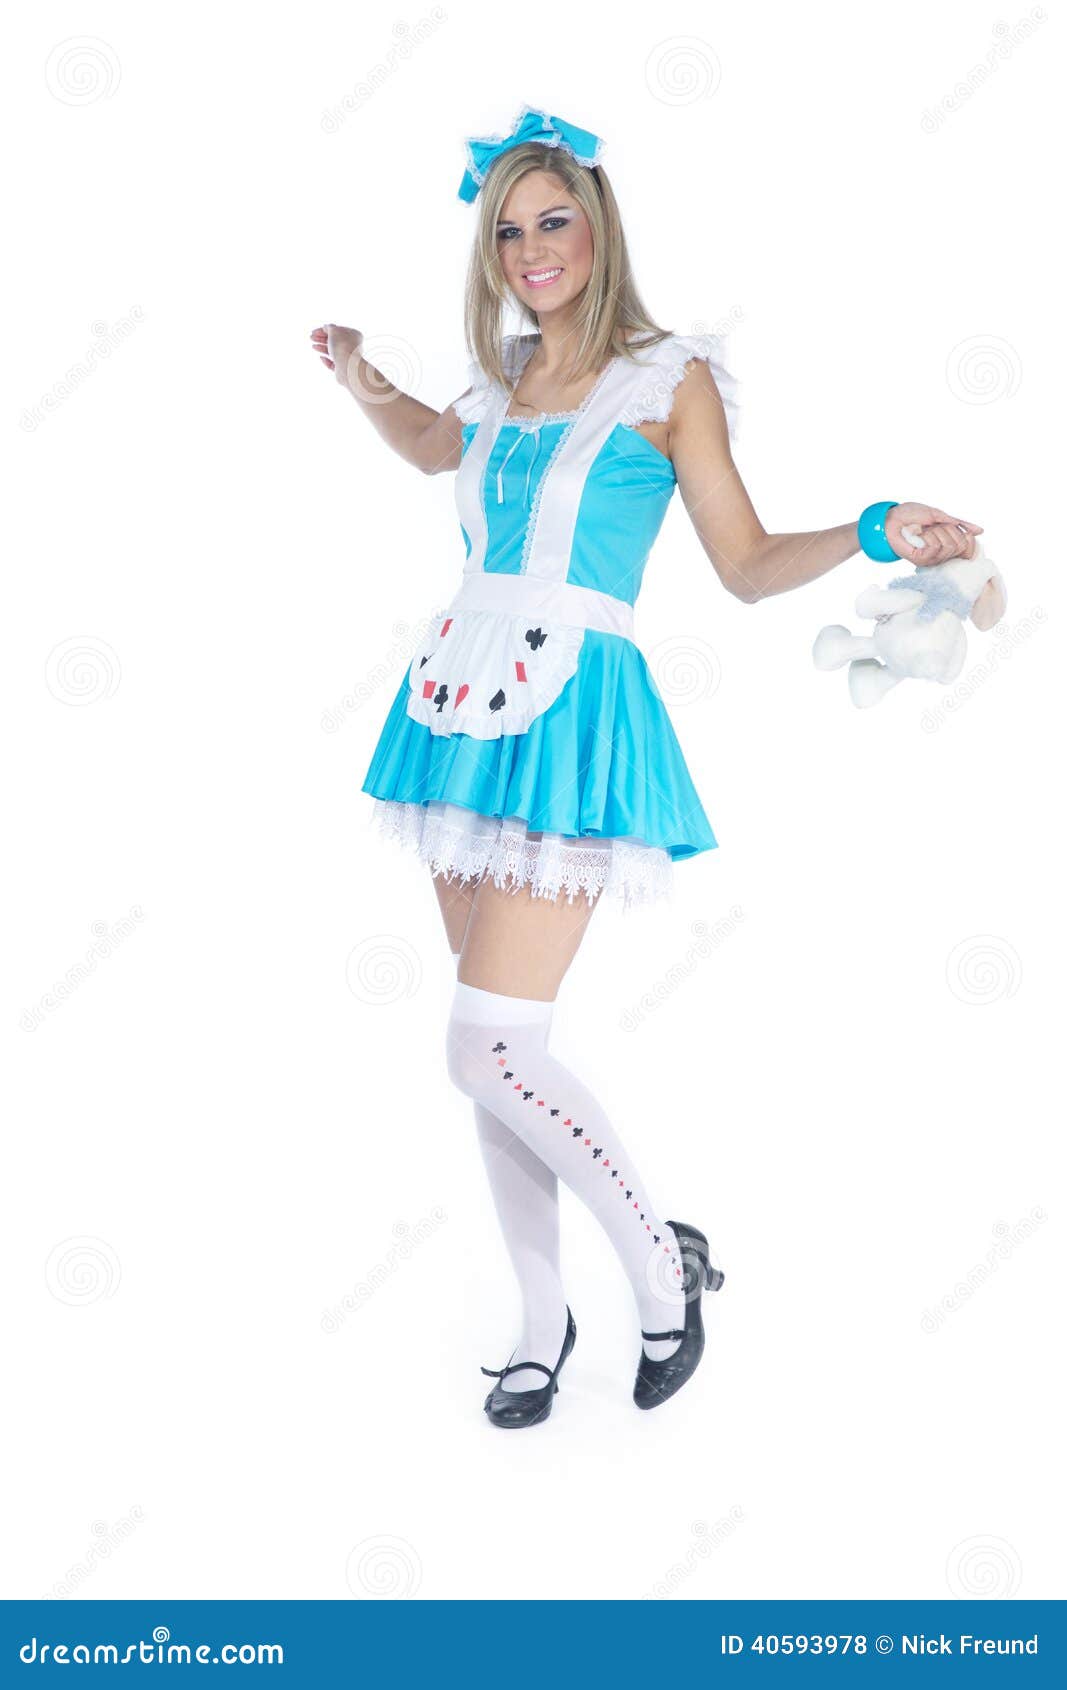 Woman in alice costume stock photo. Image of female, blue - 40593978